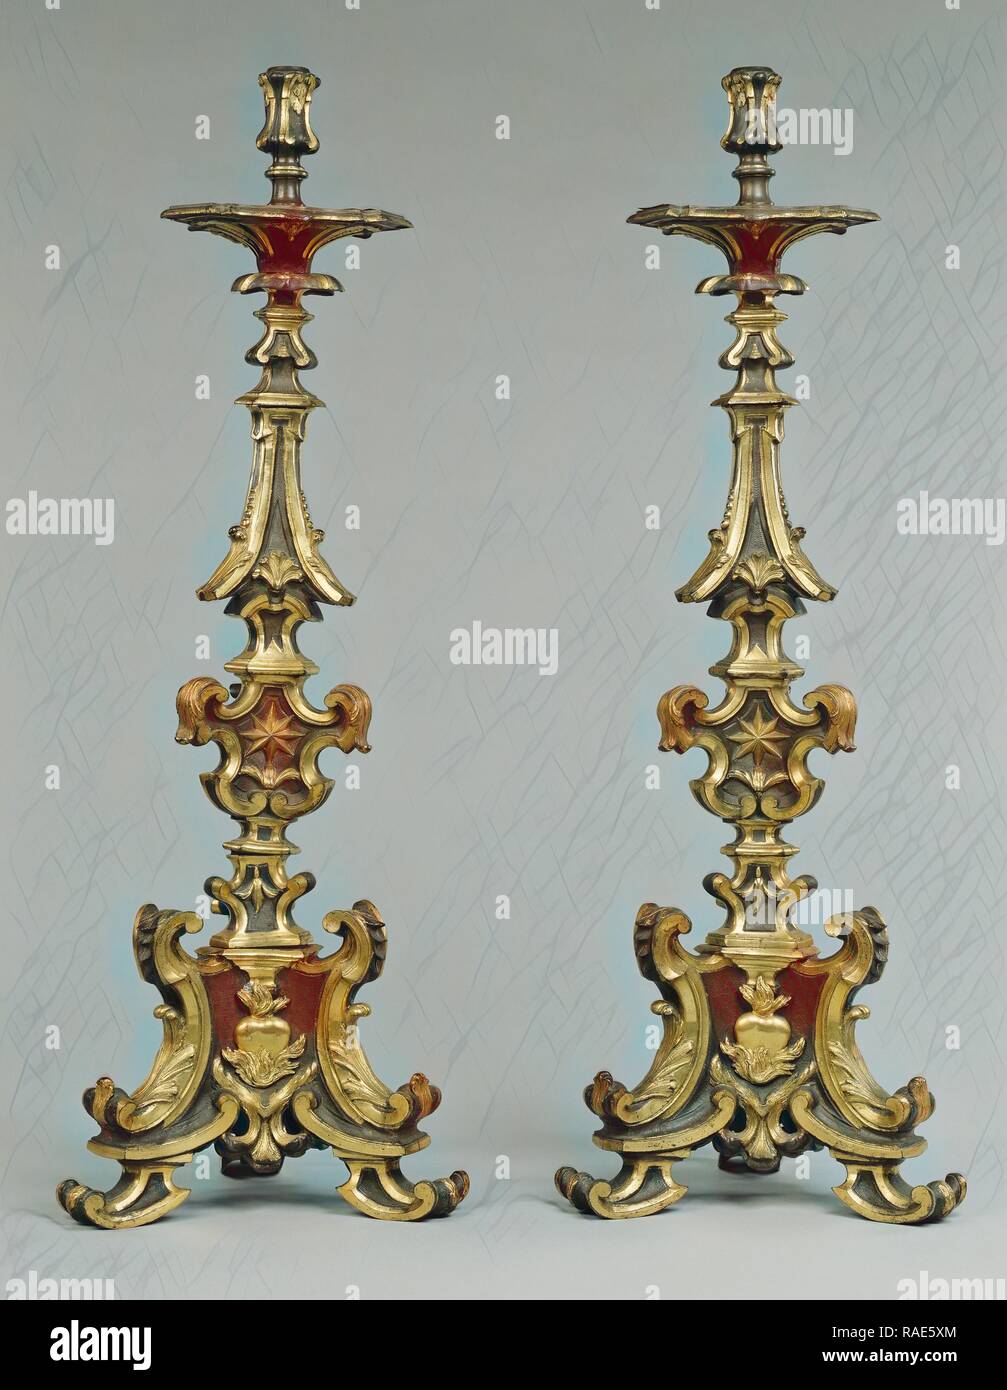 https://c8.alamy.com/comp/RAE5XM/pair-of-altar-candlesticks-italy-early-18th-century-bronze-partially-gilded-reimagined-by-gibon-classic-art-reimagined-RAE5XM.jpg